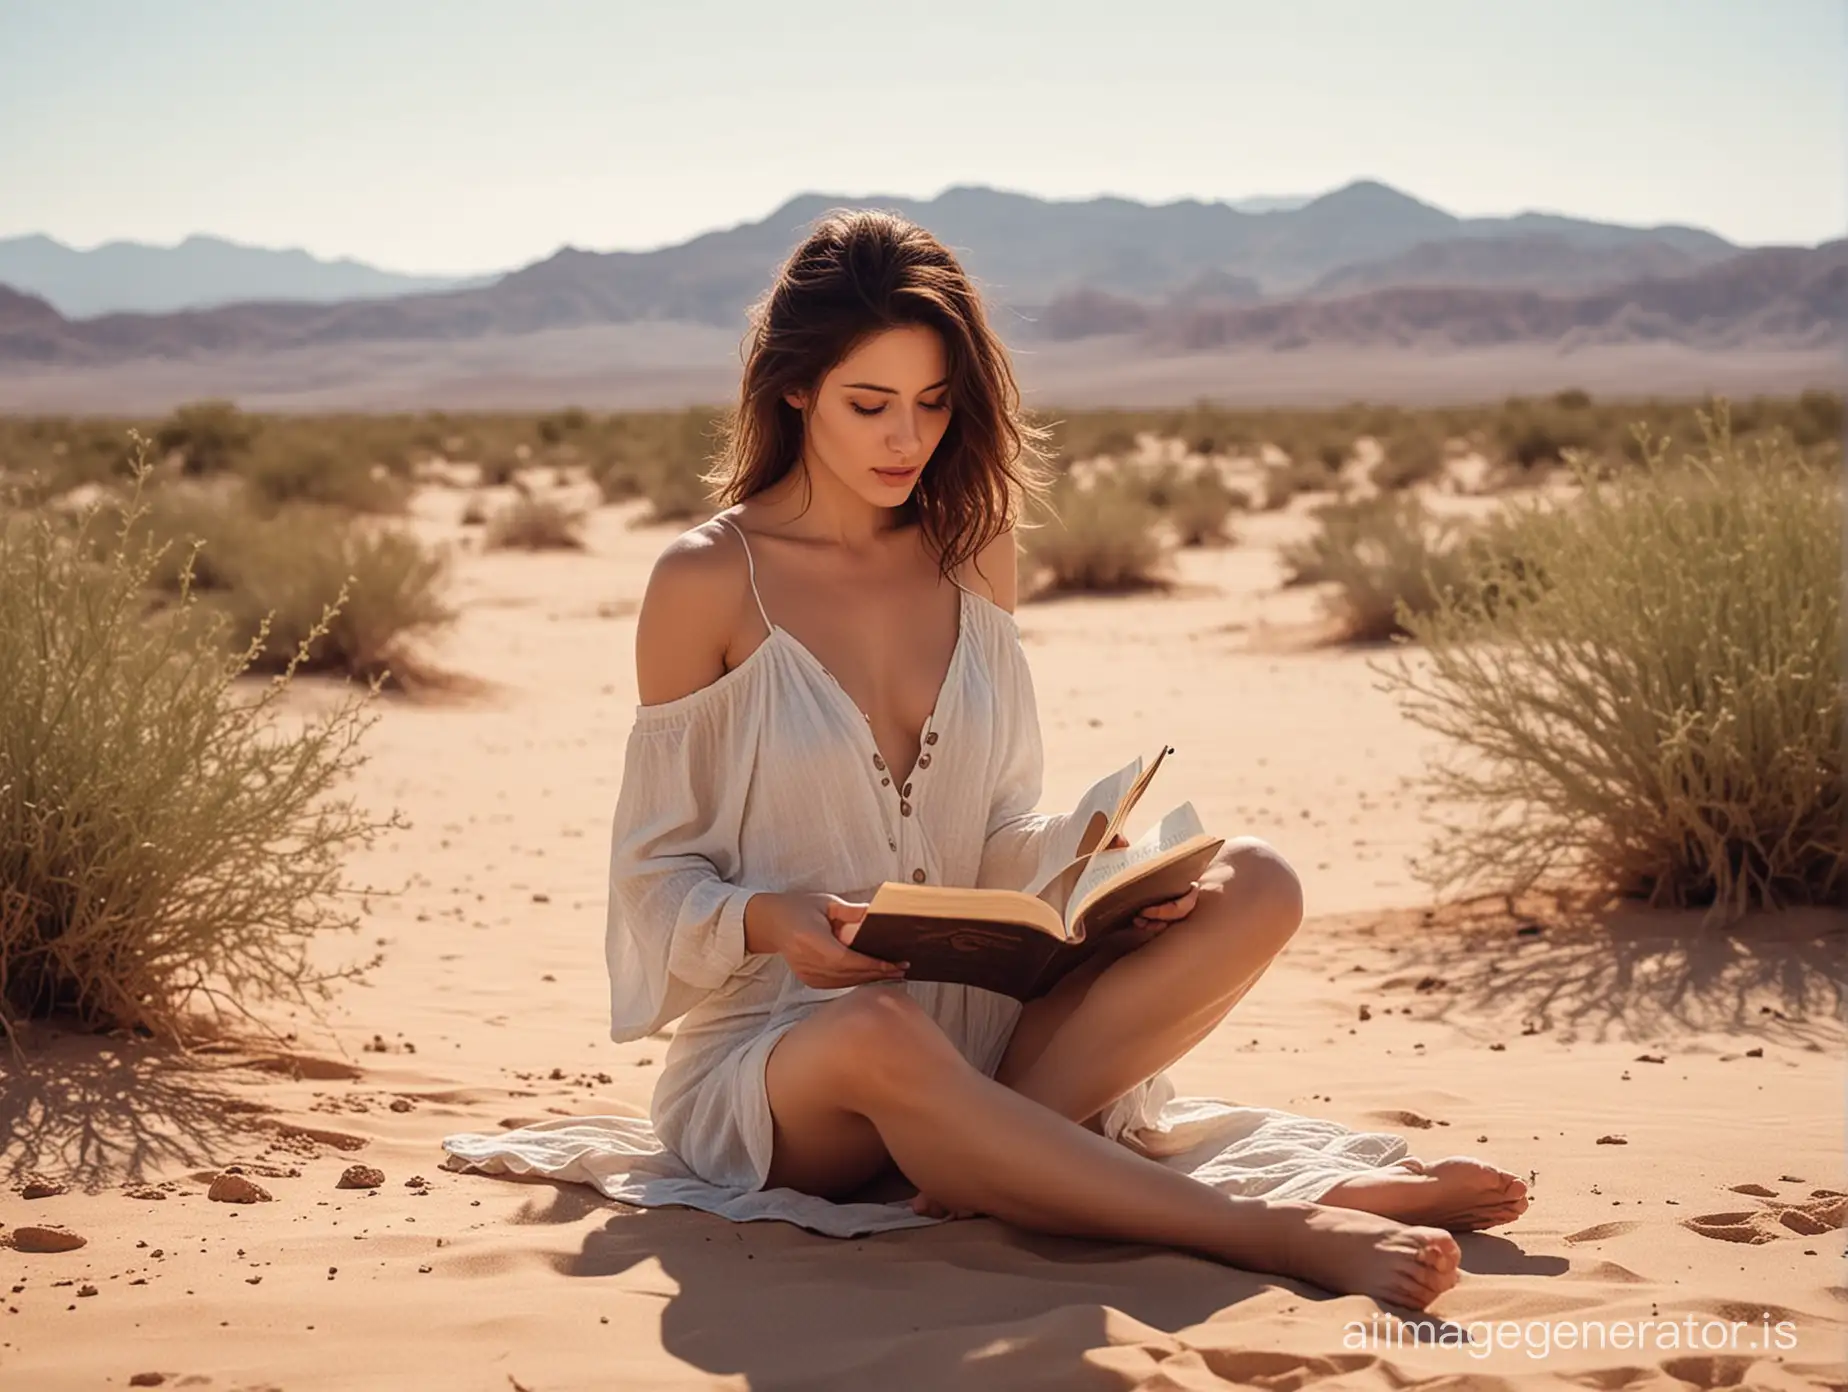 A Poetic women  reading some Poetry  in the desert while her looking  deep in her eyes with  undying loving lust  shivering through his body  for her as his deep lover of life time.